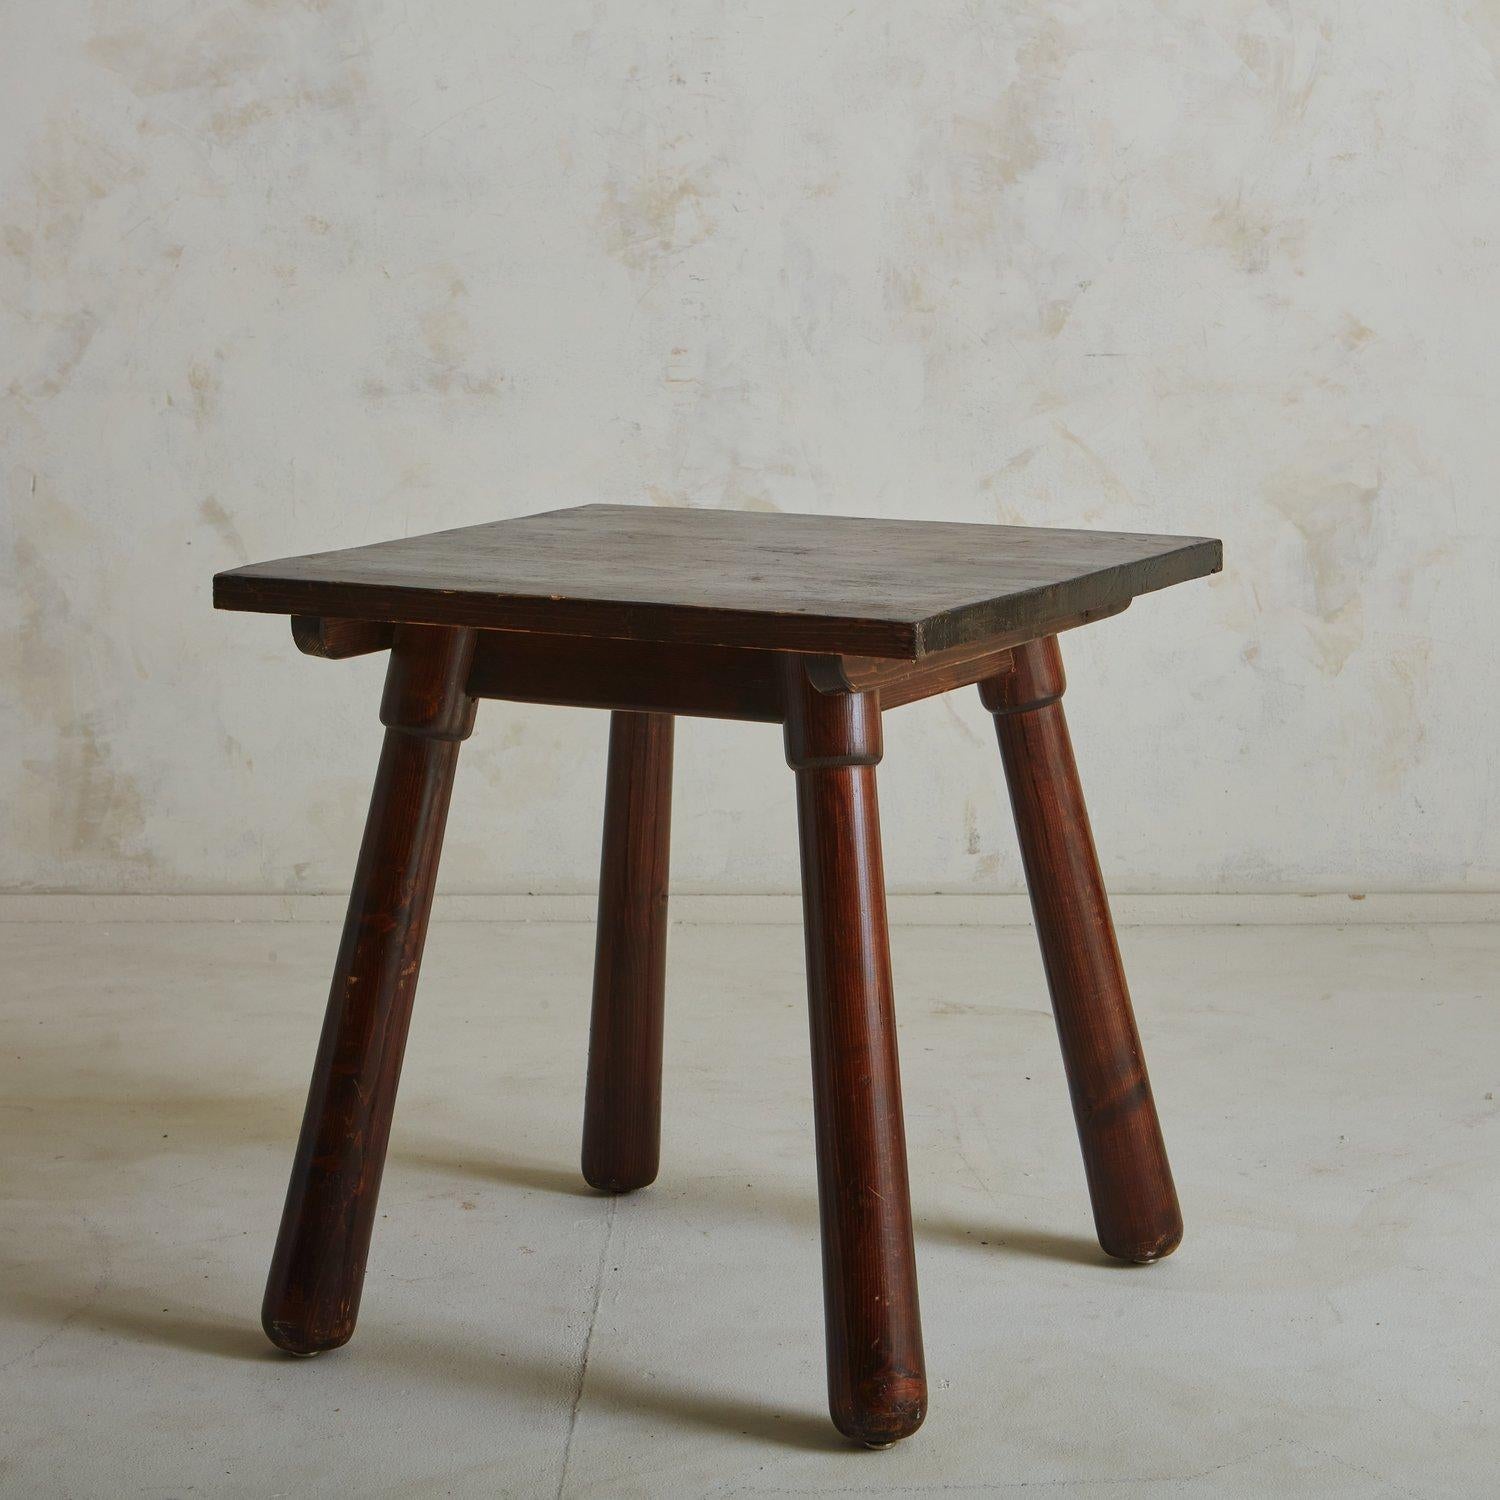 A brutalist 1960s French wooden dining table attributed to Georges Robert. This table has a rich walnut stain and a sculptural profile. It has a square top and stands on four angled, cylindrical legs with rounded feet. Unmarked. Sourced in France,